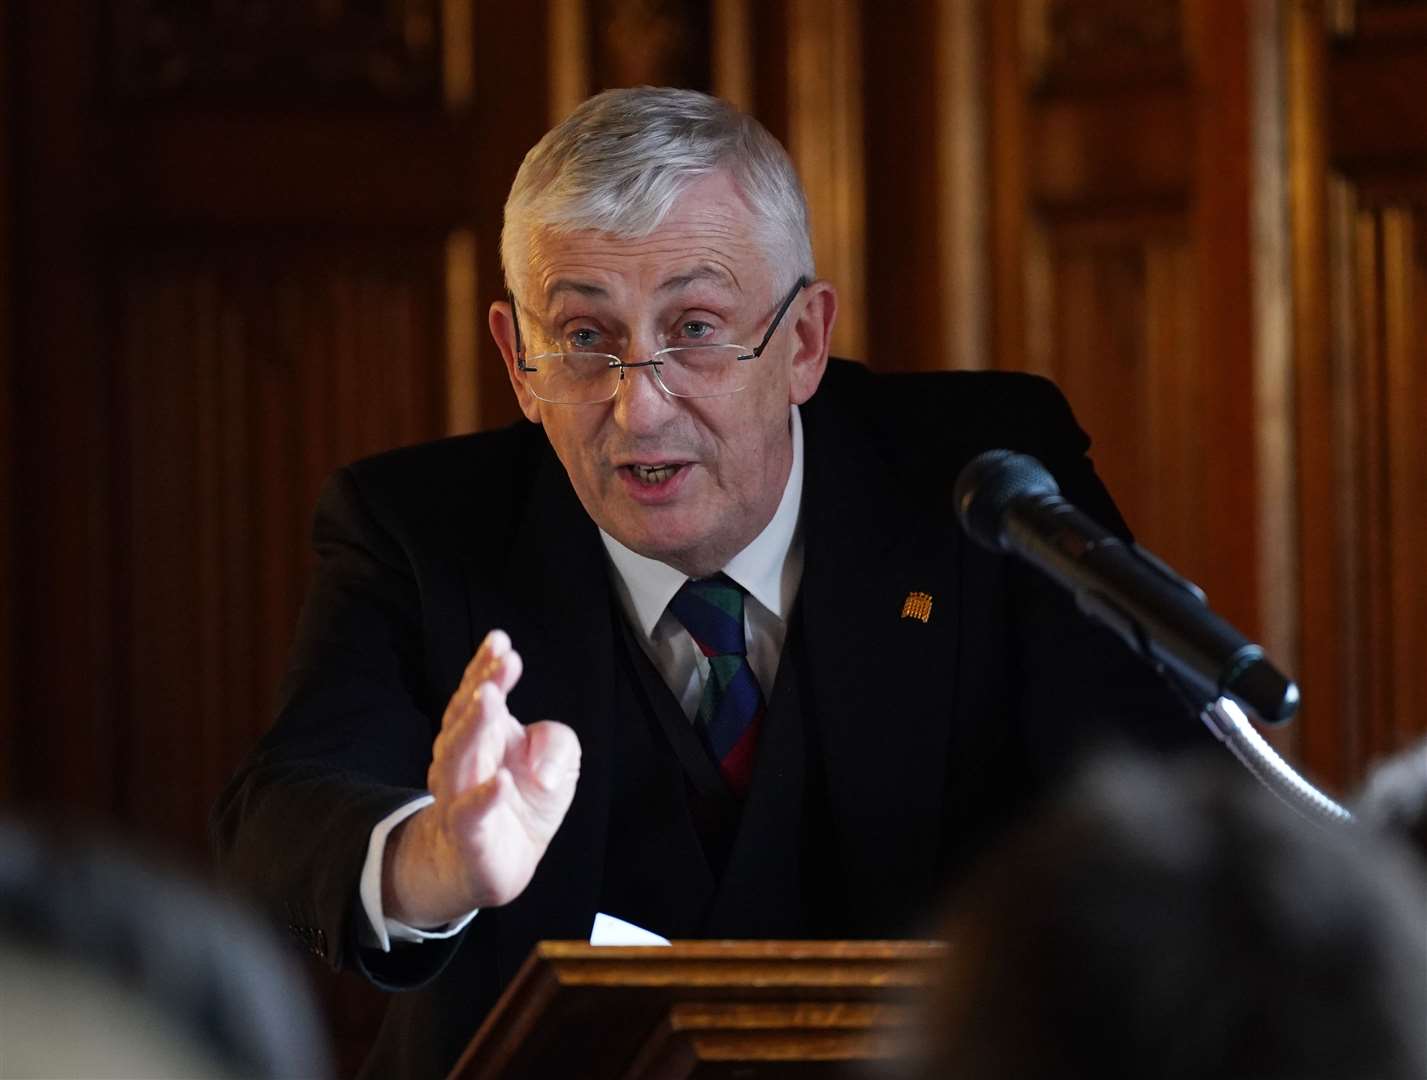 Speaker Sir Lindsay Hoyle told MPs about increased security followed protests (Yui Mok/PA)